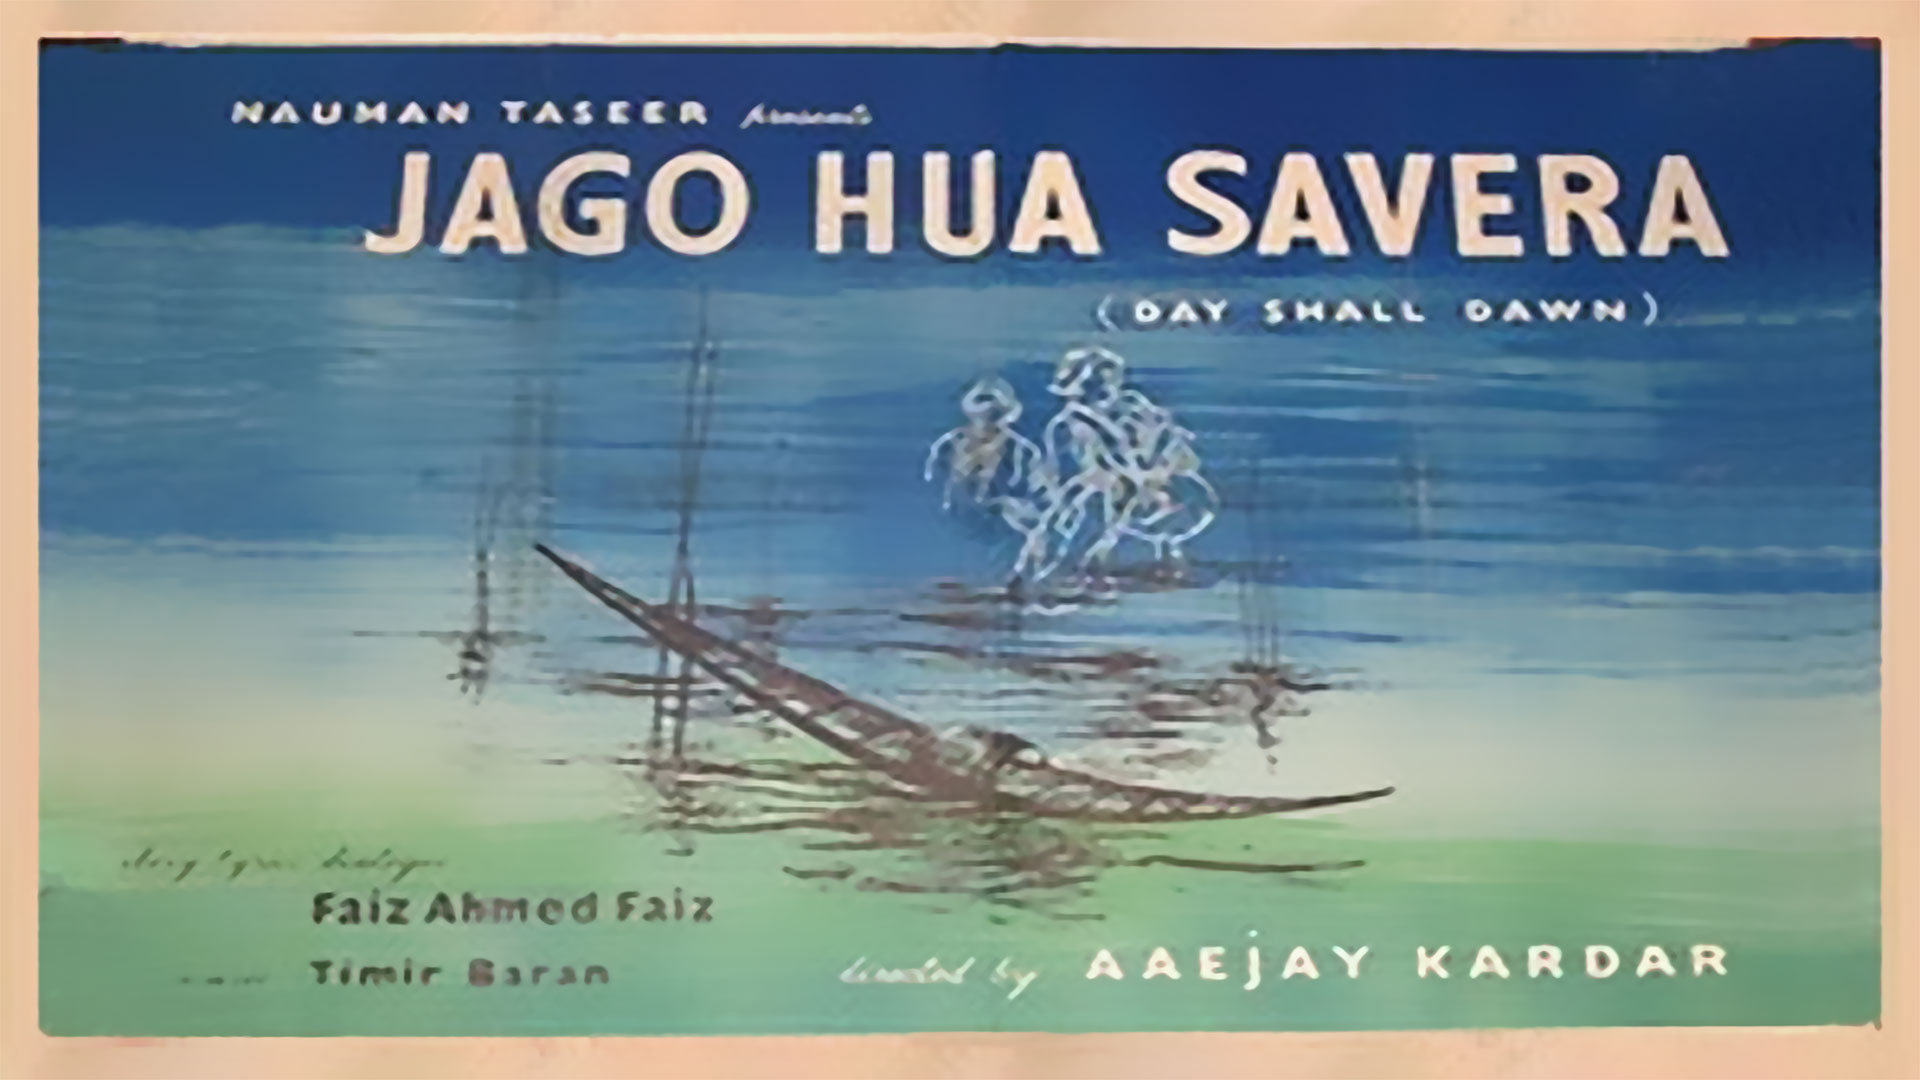 stylized movie poster with etching of small boat on water